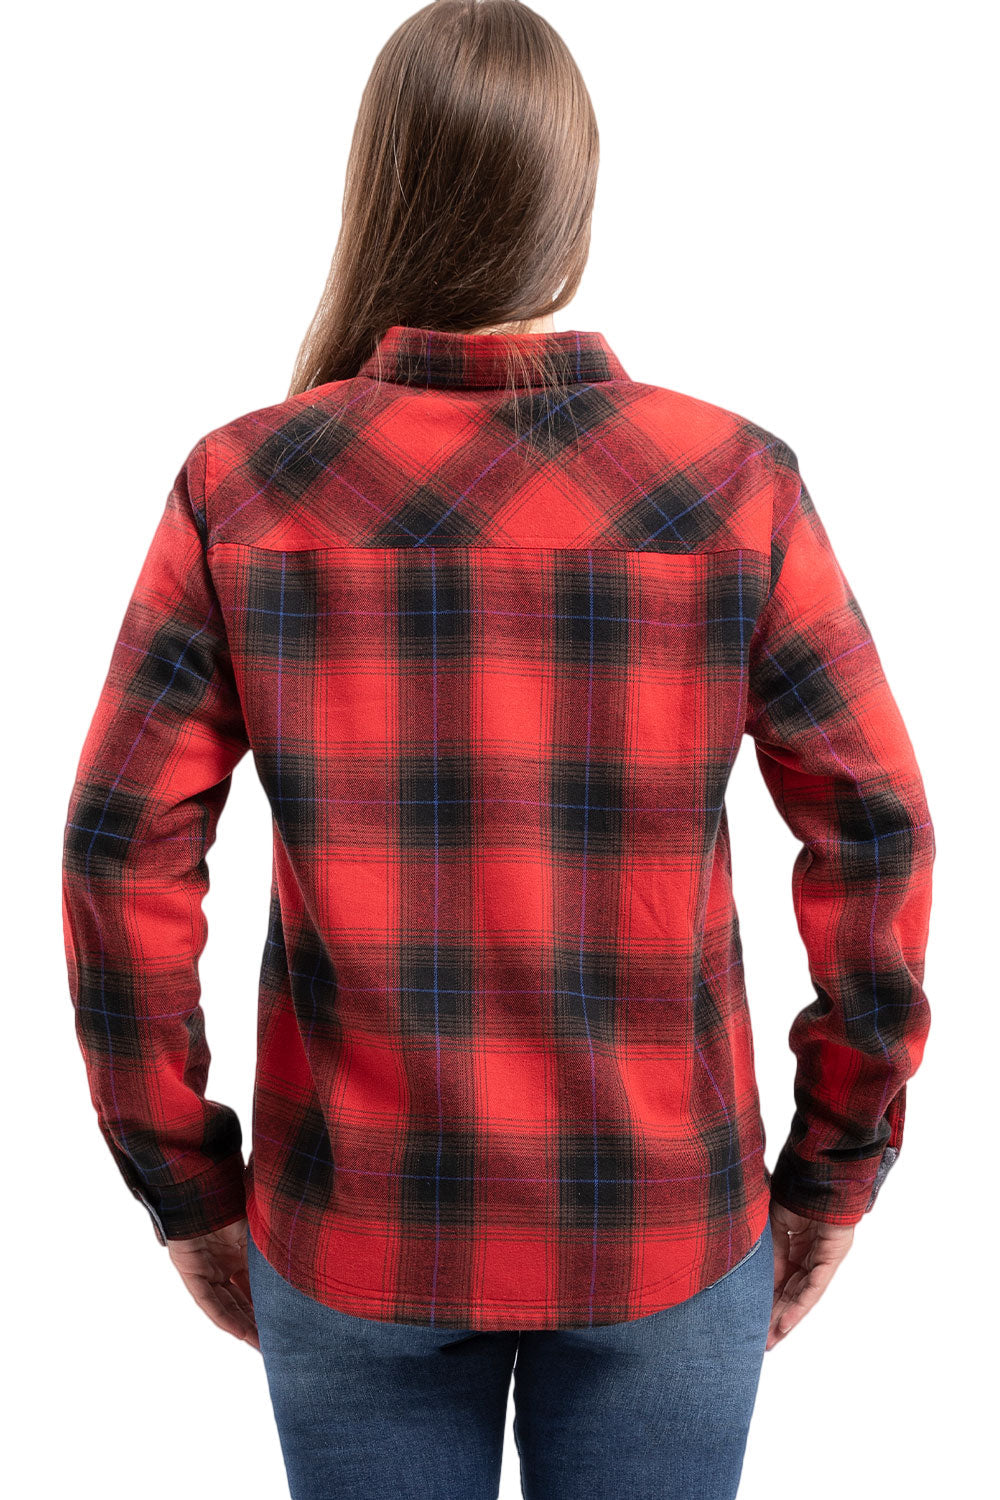 Women's Matching Family Fleece Lined Red Plaid Shacket